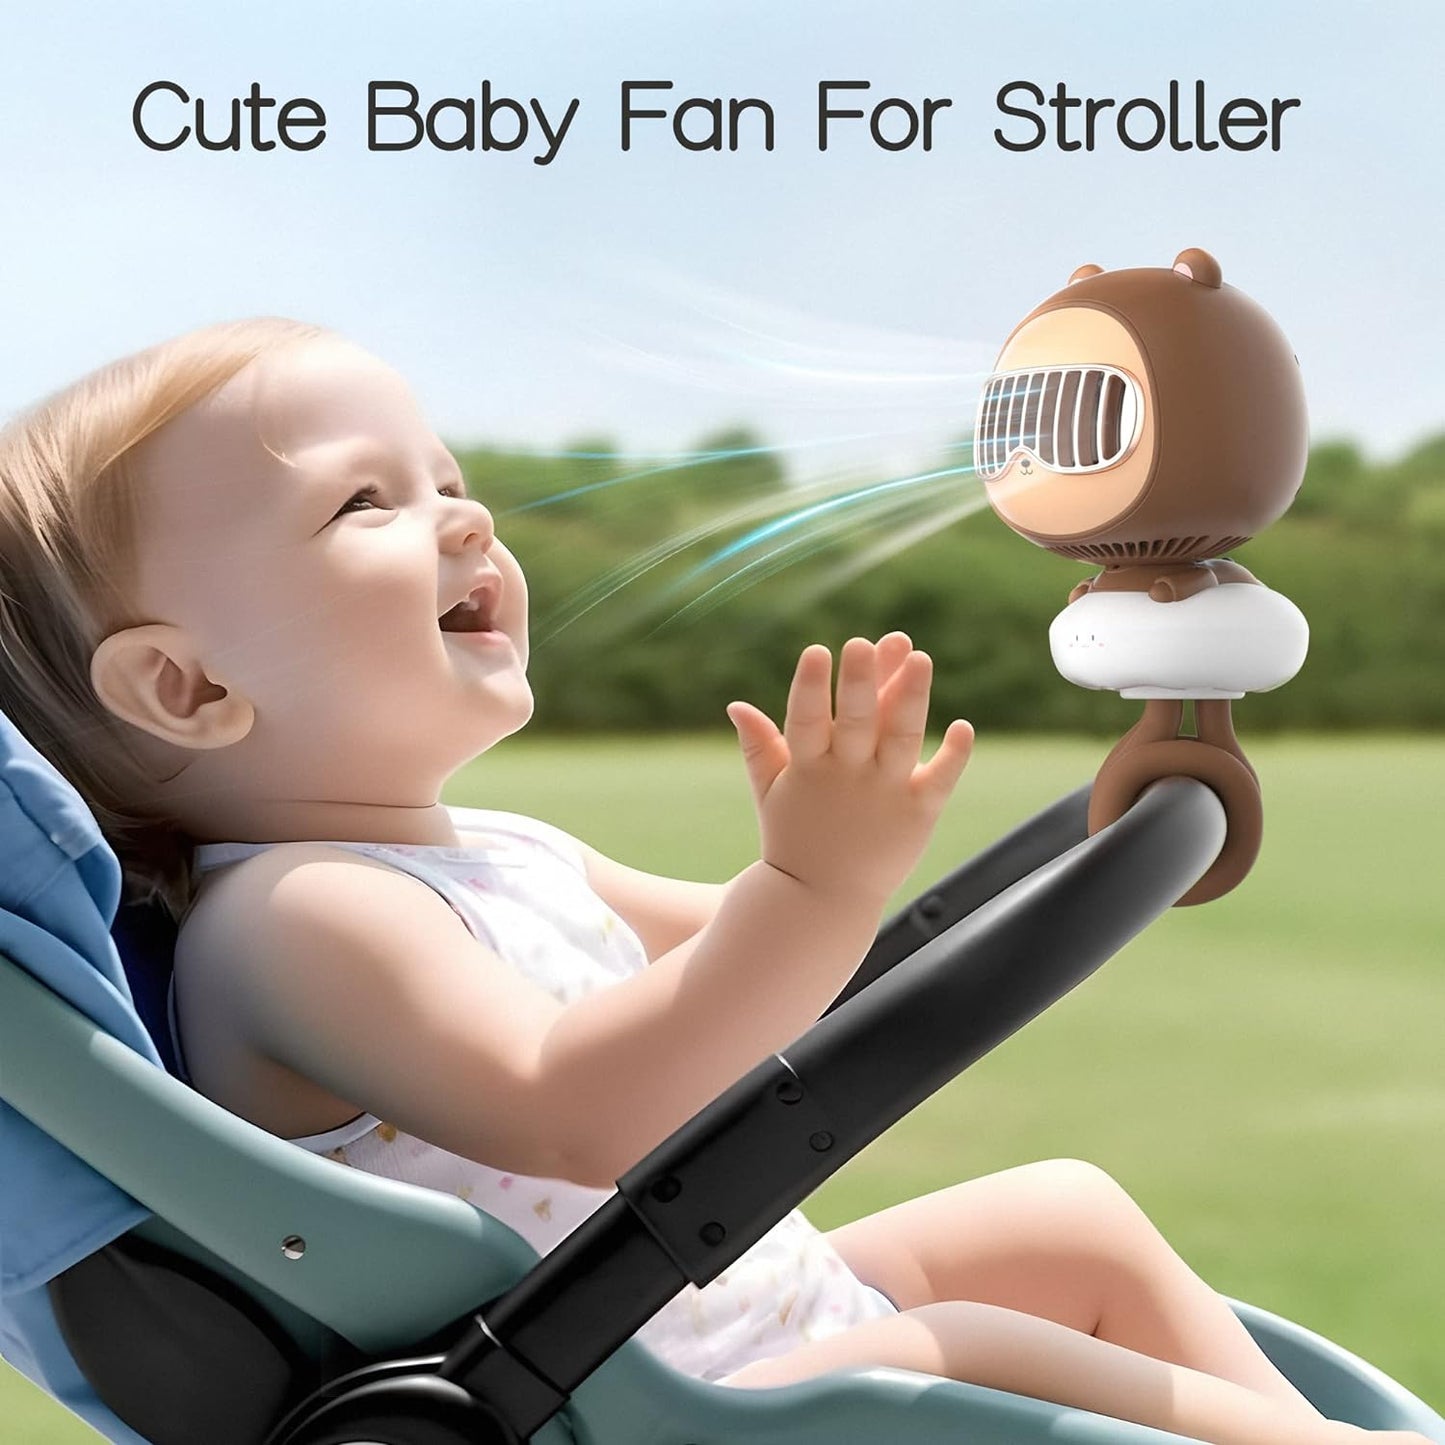 KinYiLO Cute Stroller Fan Clip On for Baby, Portable Baby Stroller Fans Bladeless, 4 Speeds Auto Oscillating, 4000mAh Rechargeable Battery Powered, Flexible Tripod Small Cooling Fan for Crib/Car seat